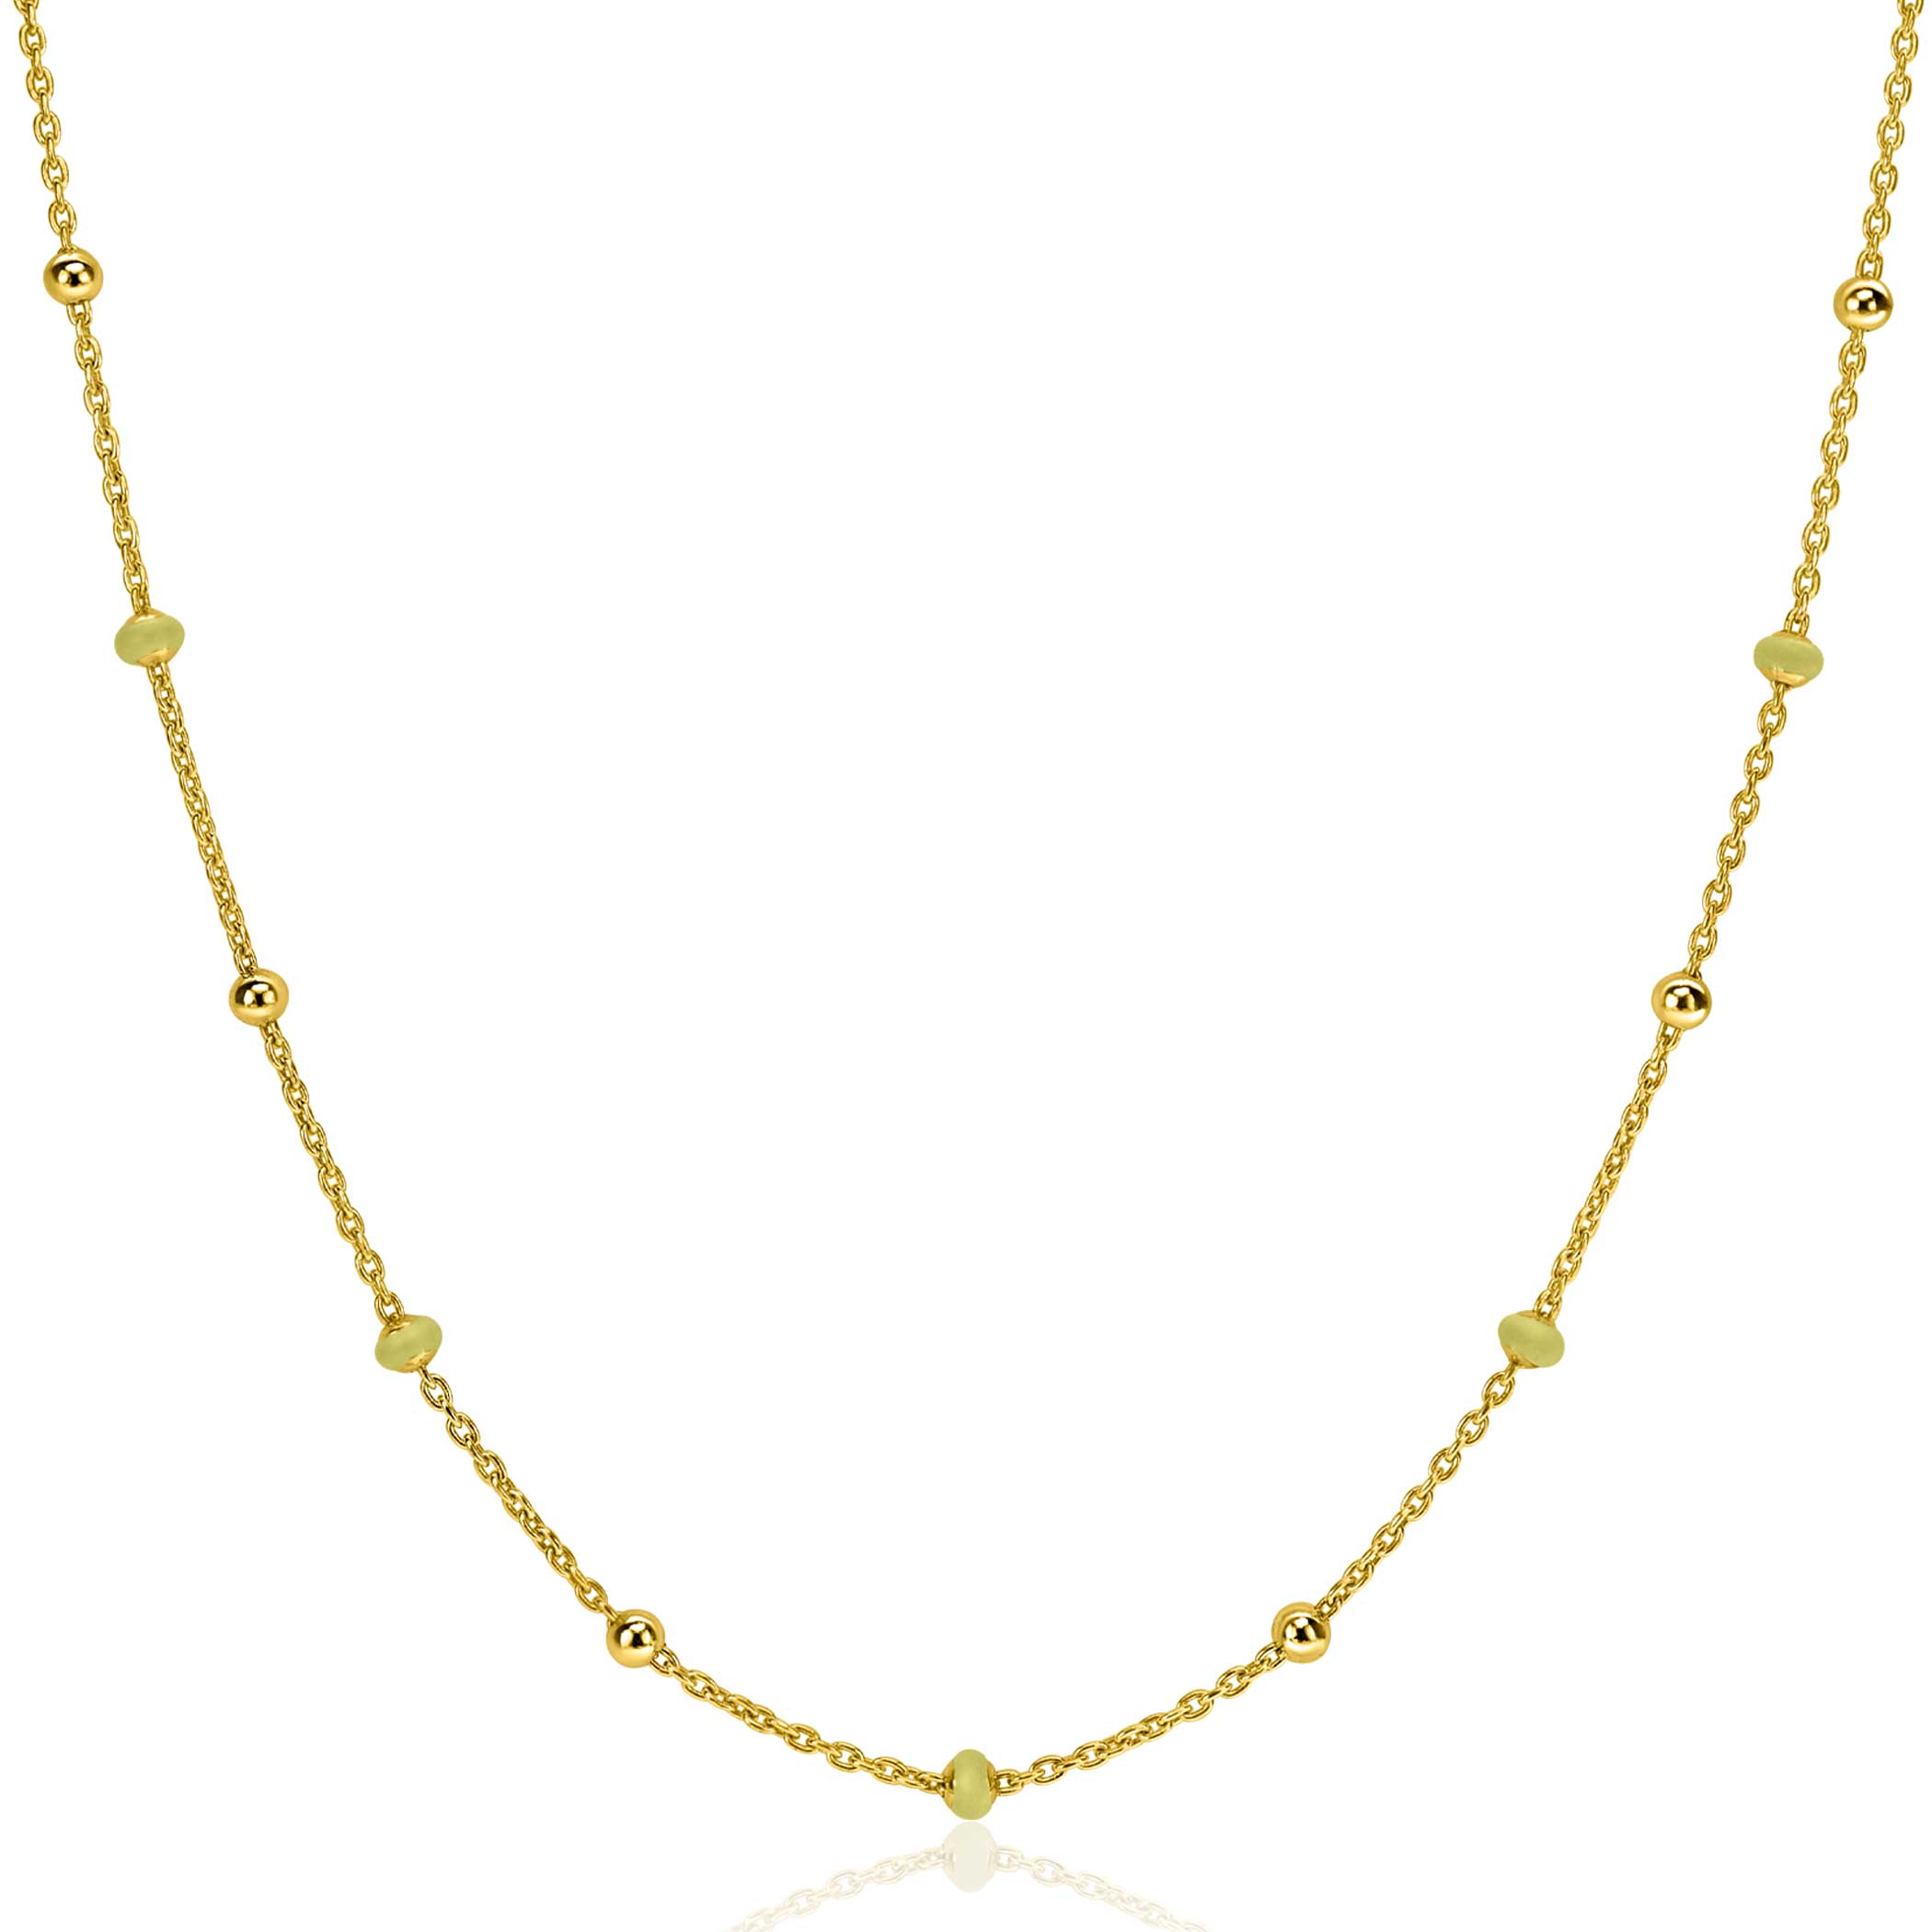 ZINZI Gold Plated Sterling Silver Fantasy Necklace with 13 Yellow Green Donuts and Shiny Beads 42-45cm ZIC2508